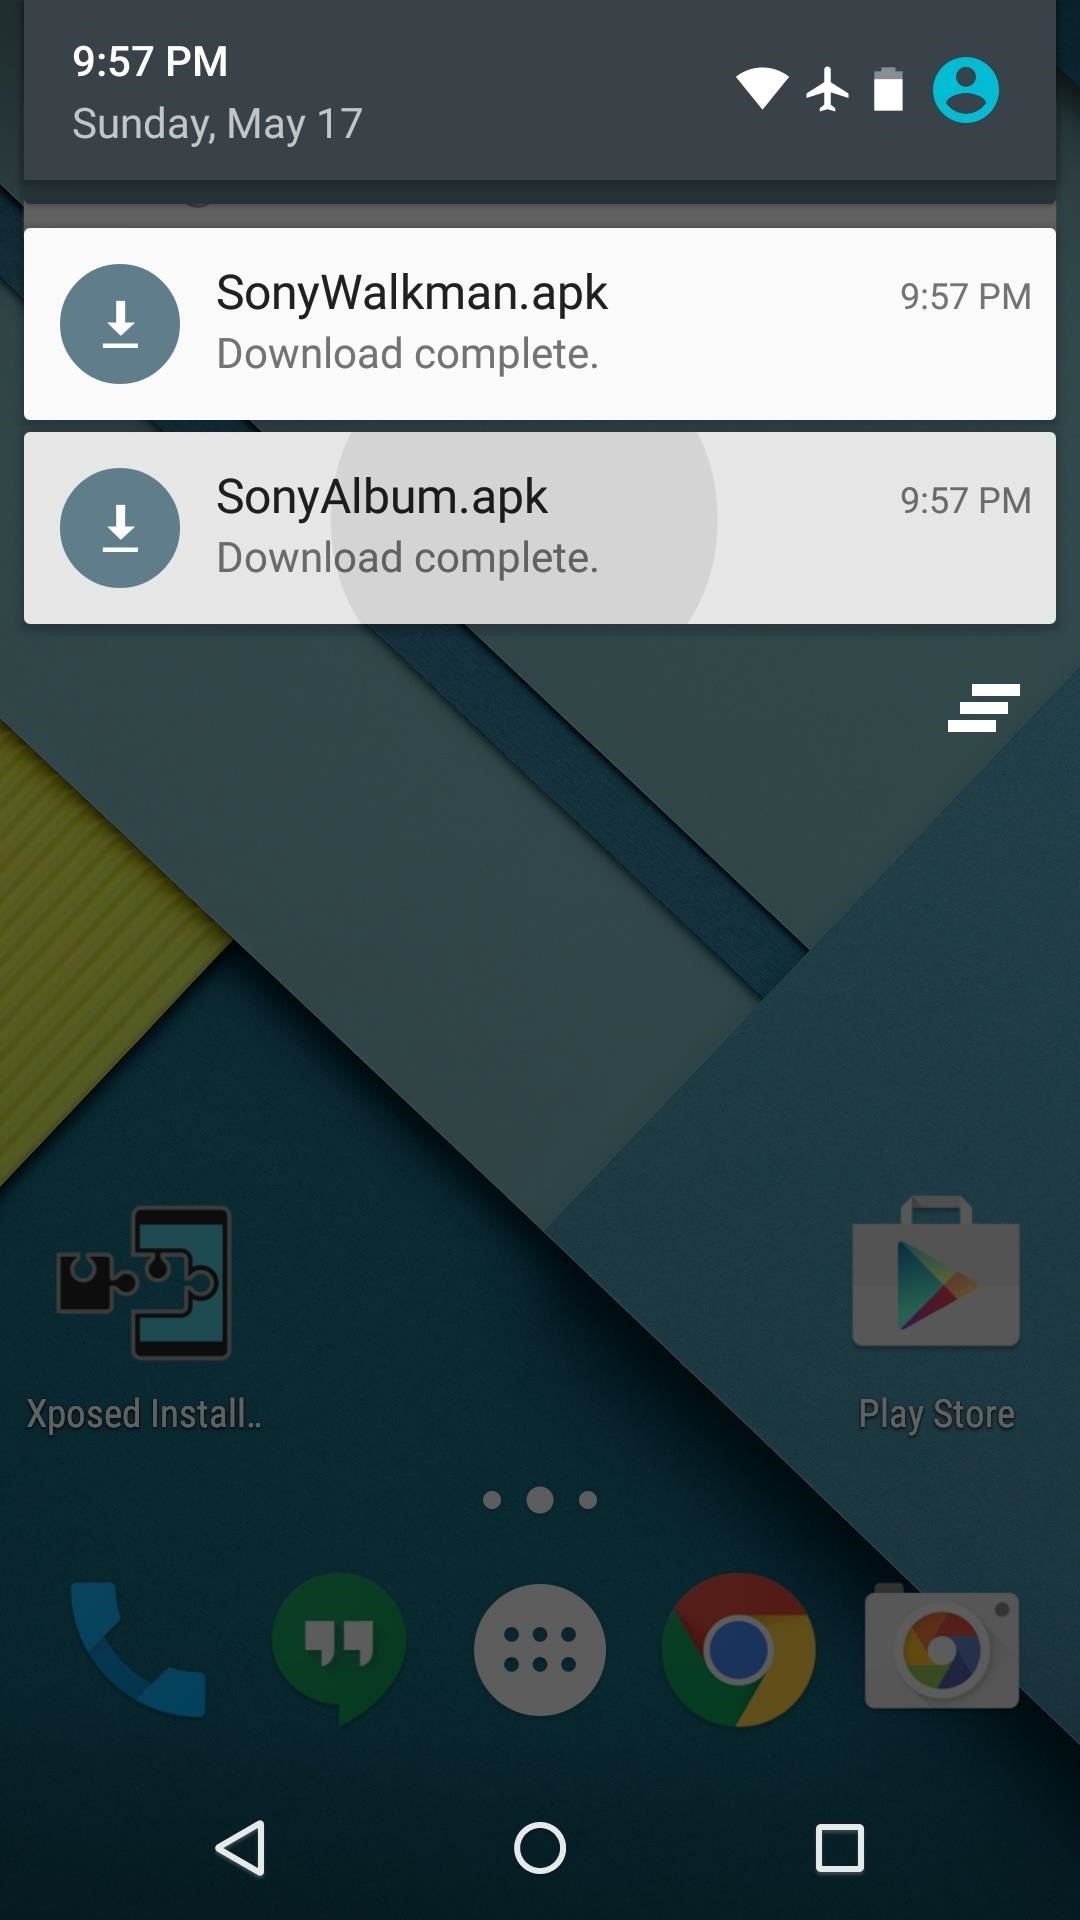 How to Install Sony's Newest Album & Walkman Apps on Almost Any Android